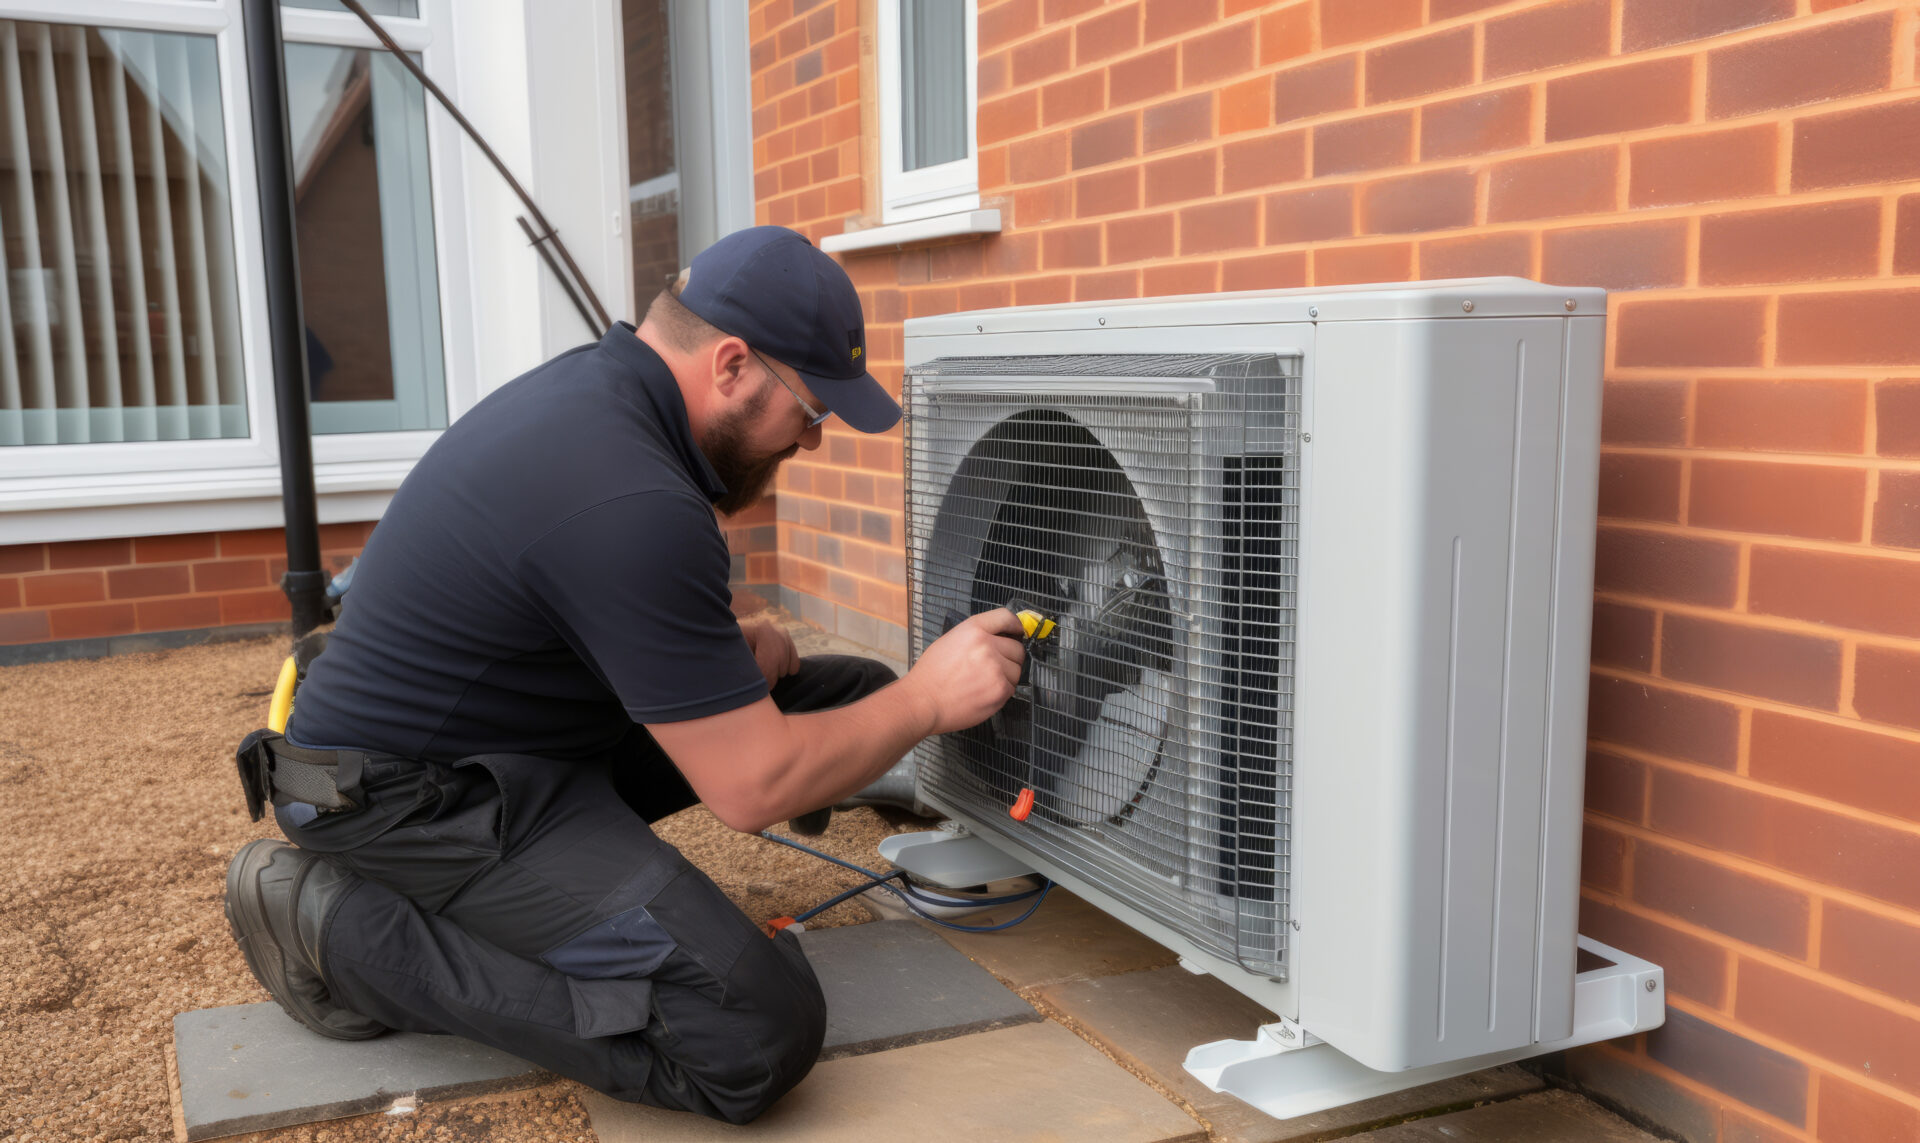 An air source heat pump heating unit installed on the outside of a house by an engineer.